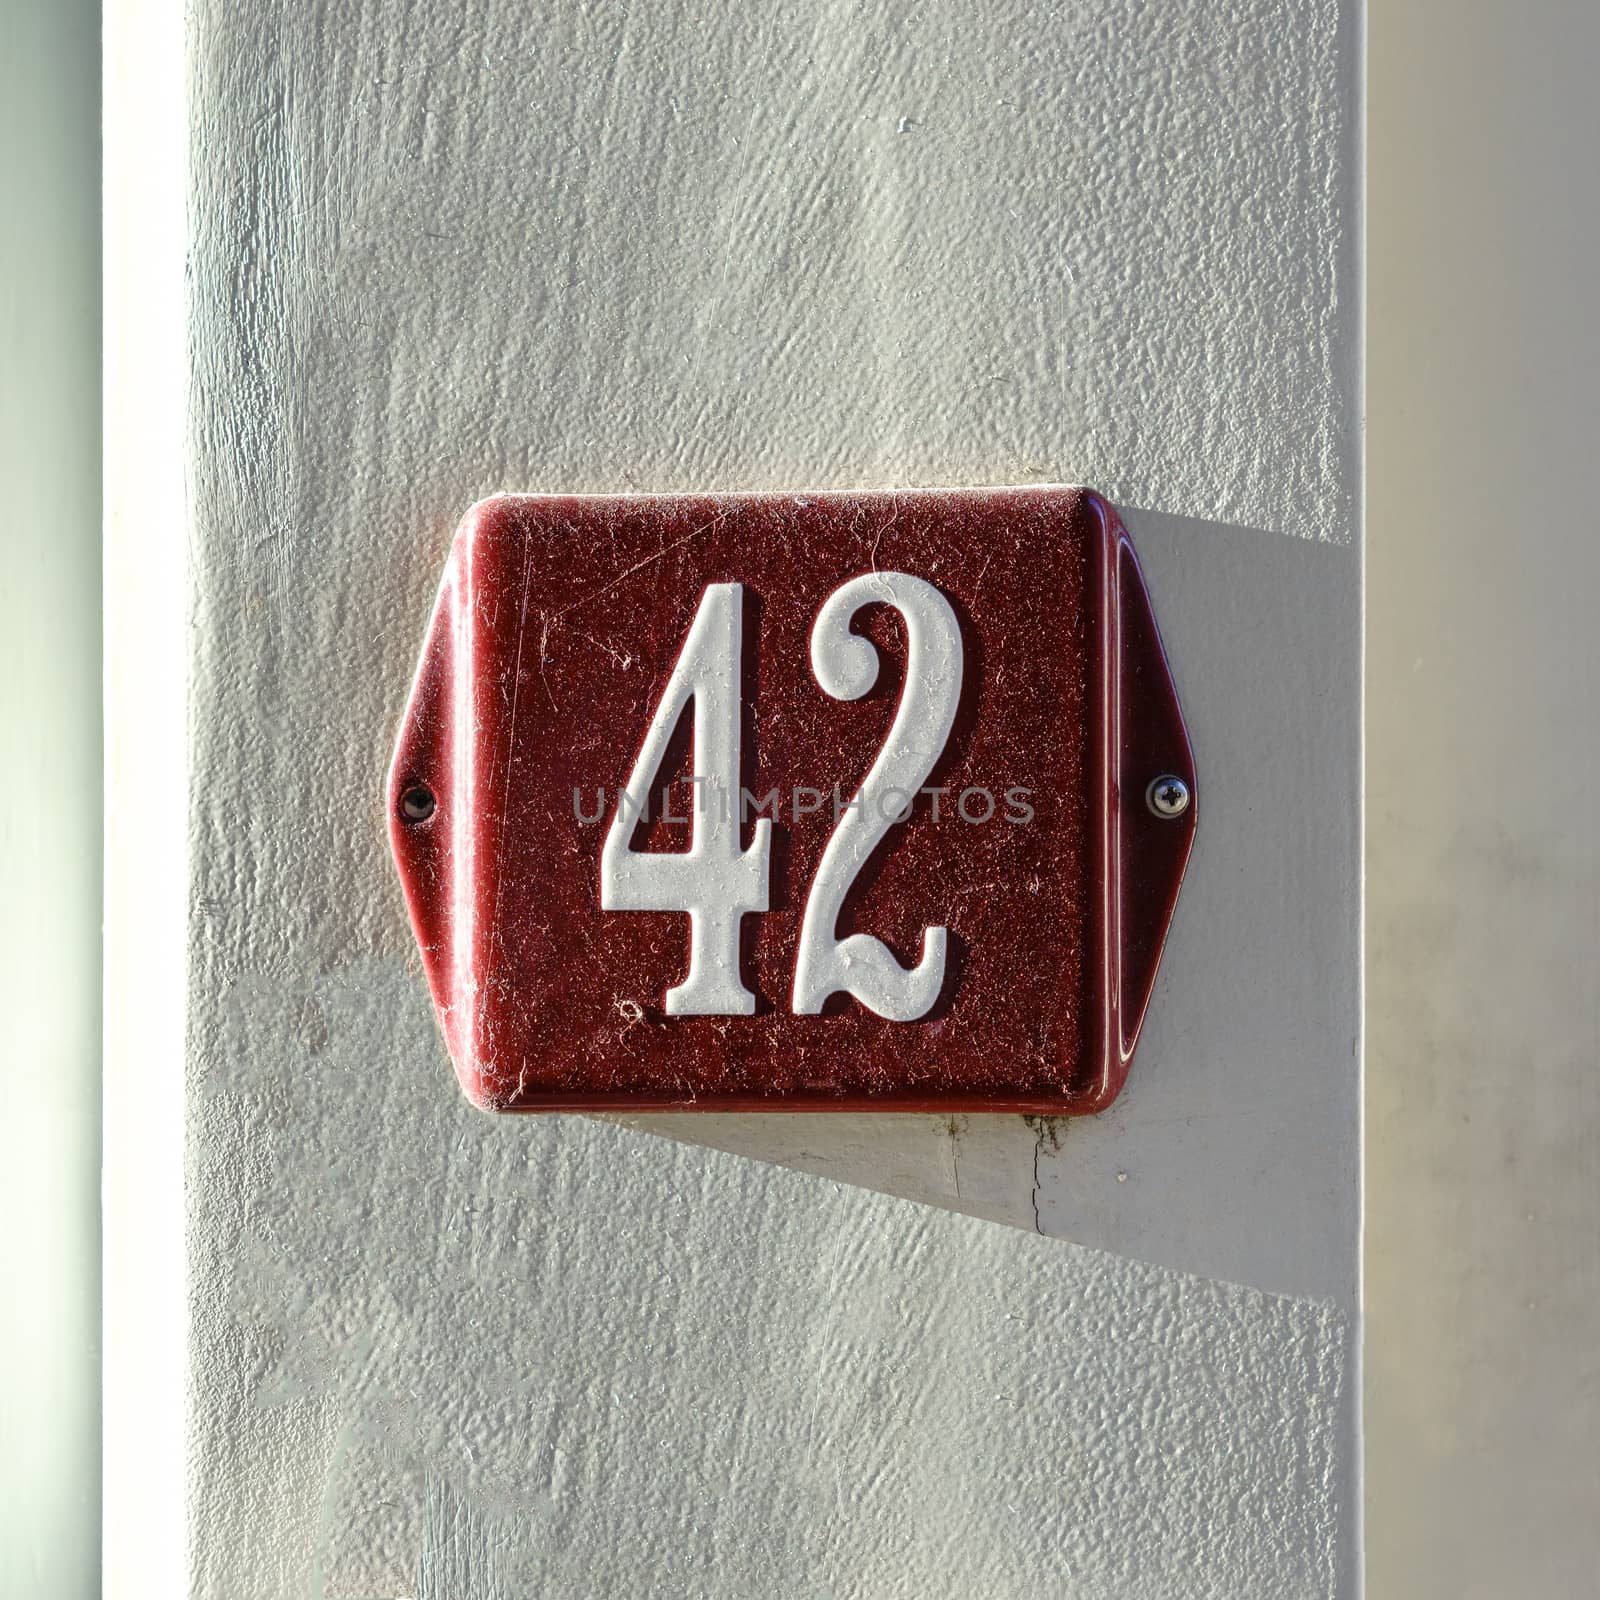 Enameled house number forty two (42)